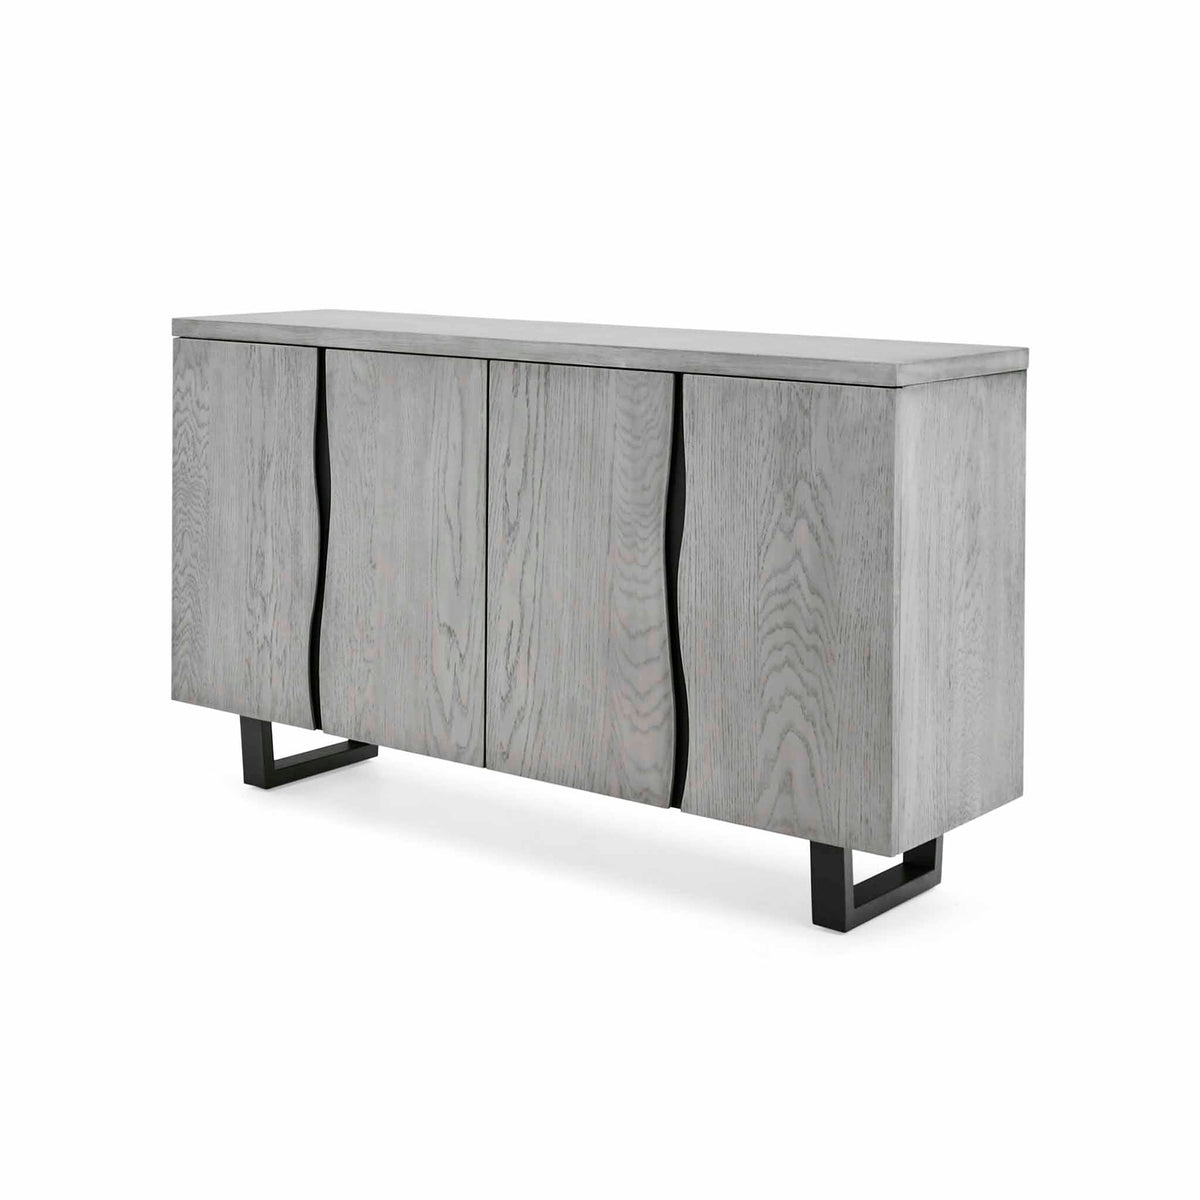 Soho Large Sideboard - Side view